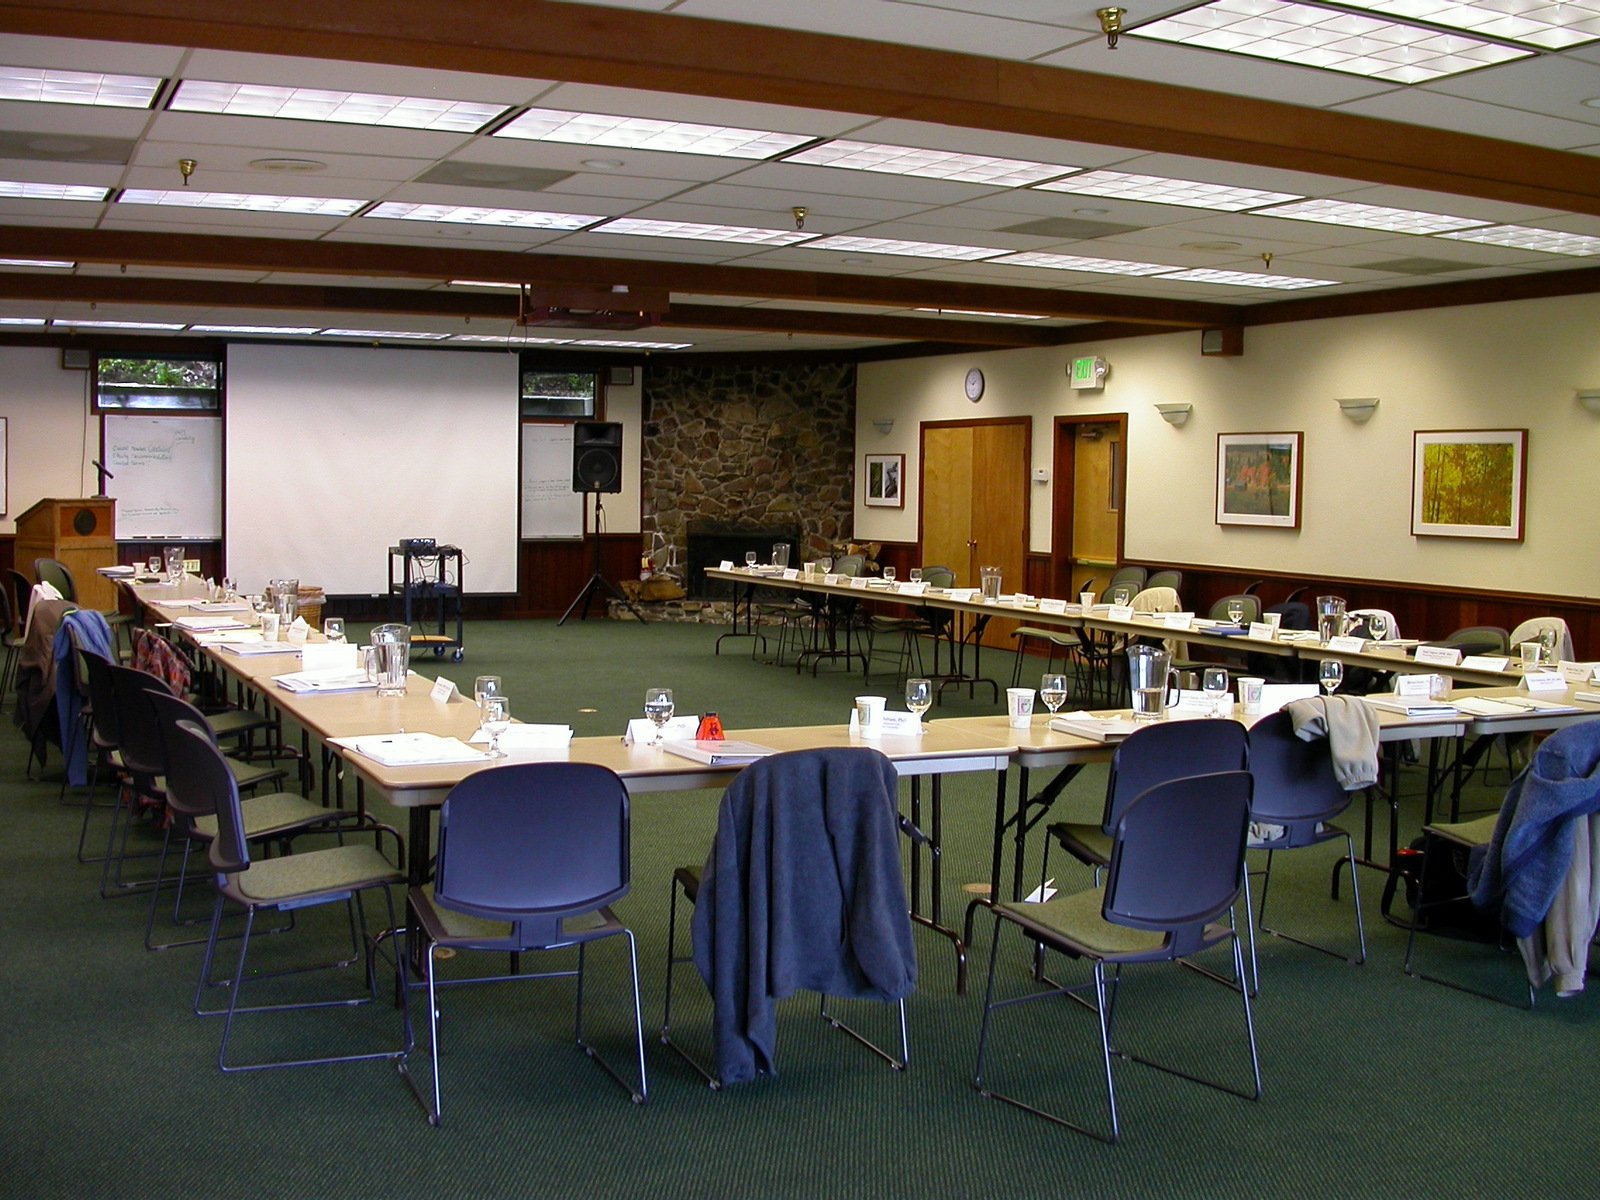 a large table set for a conference and a projection screen in the back